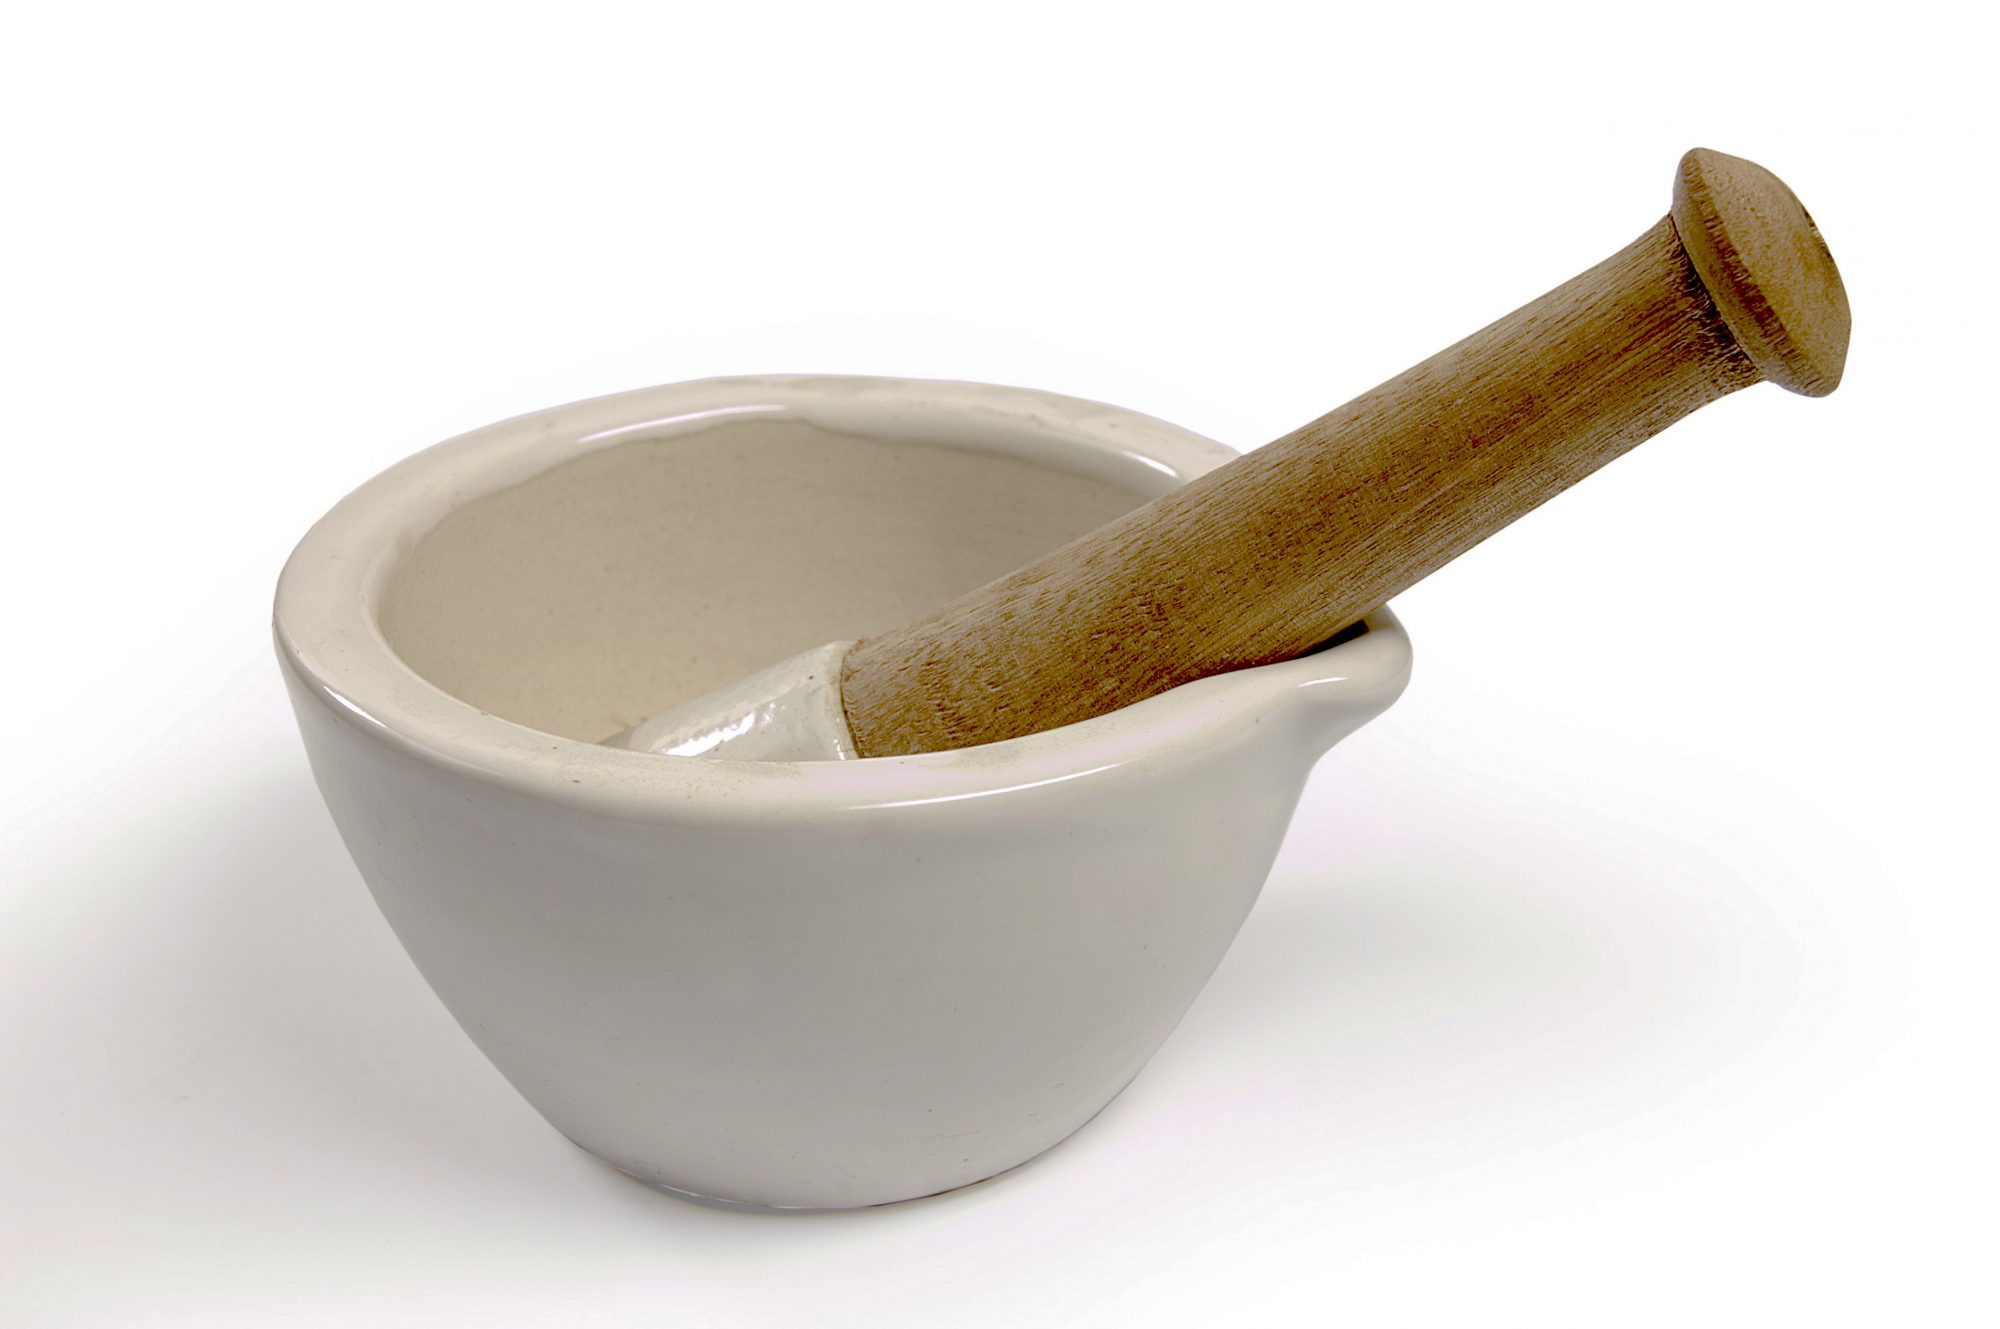 Why You Should Go Ahead and Buy a Mortar and Pestle | MyRecipes